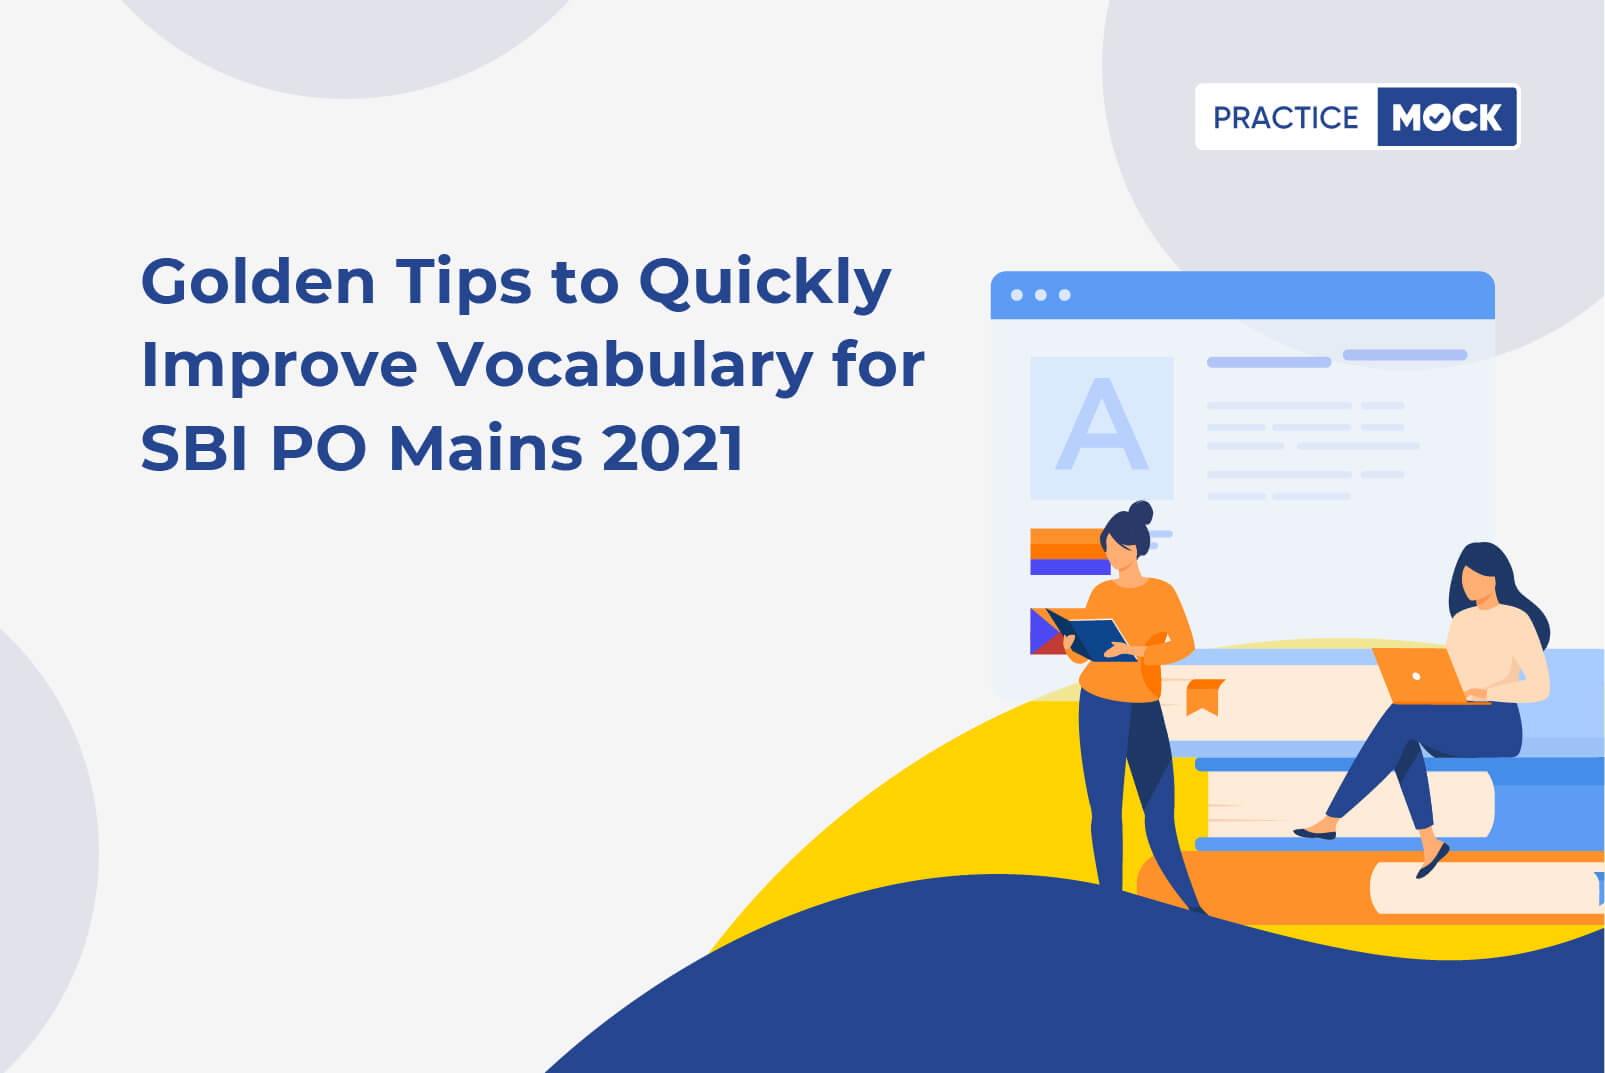 Golden Tips to Quickly Improve Vocabulary for SBI PO Mains 2021